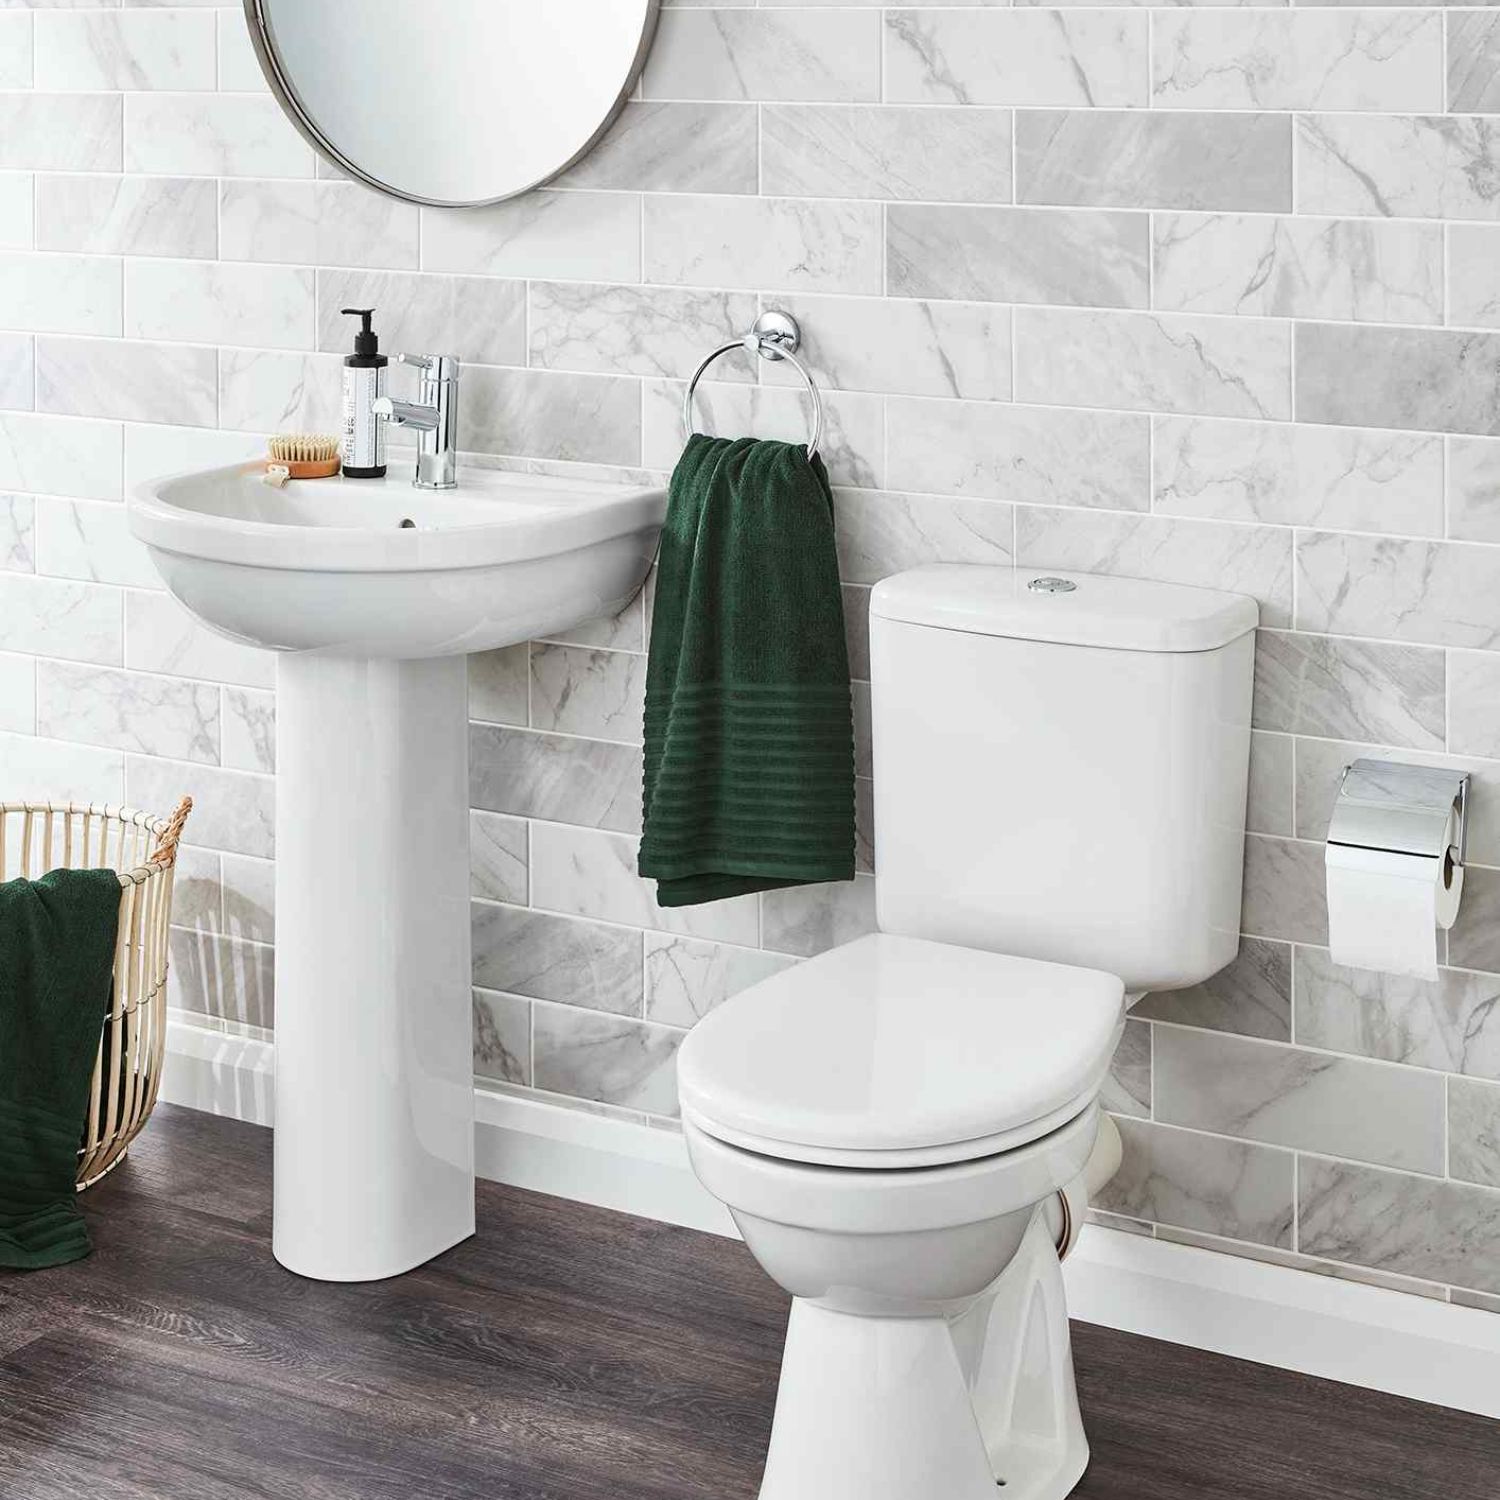 Milton Toilet and Basin Suit: Stylish Vanity Units for Bathrooms